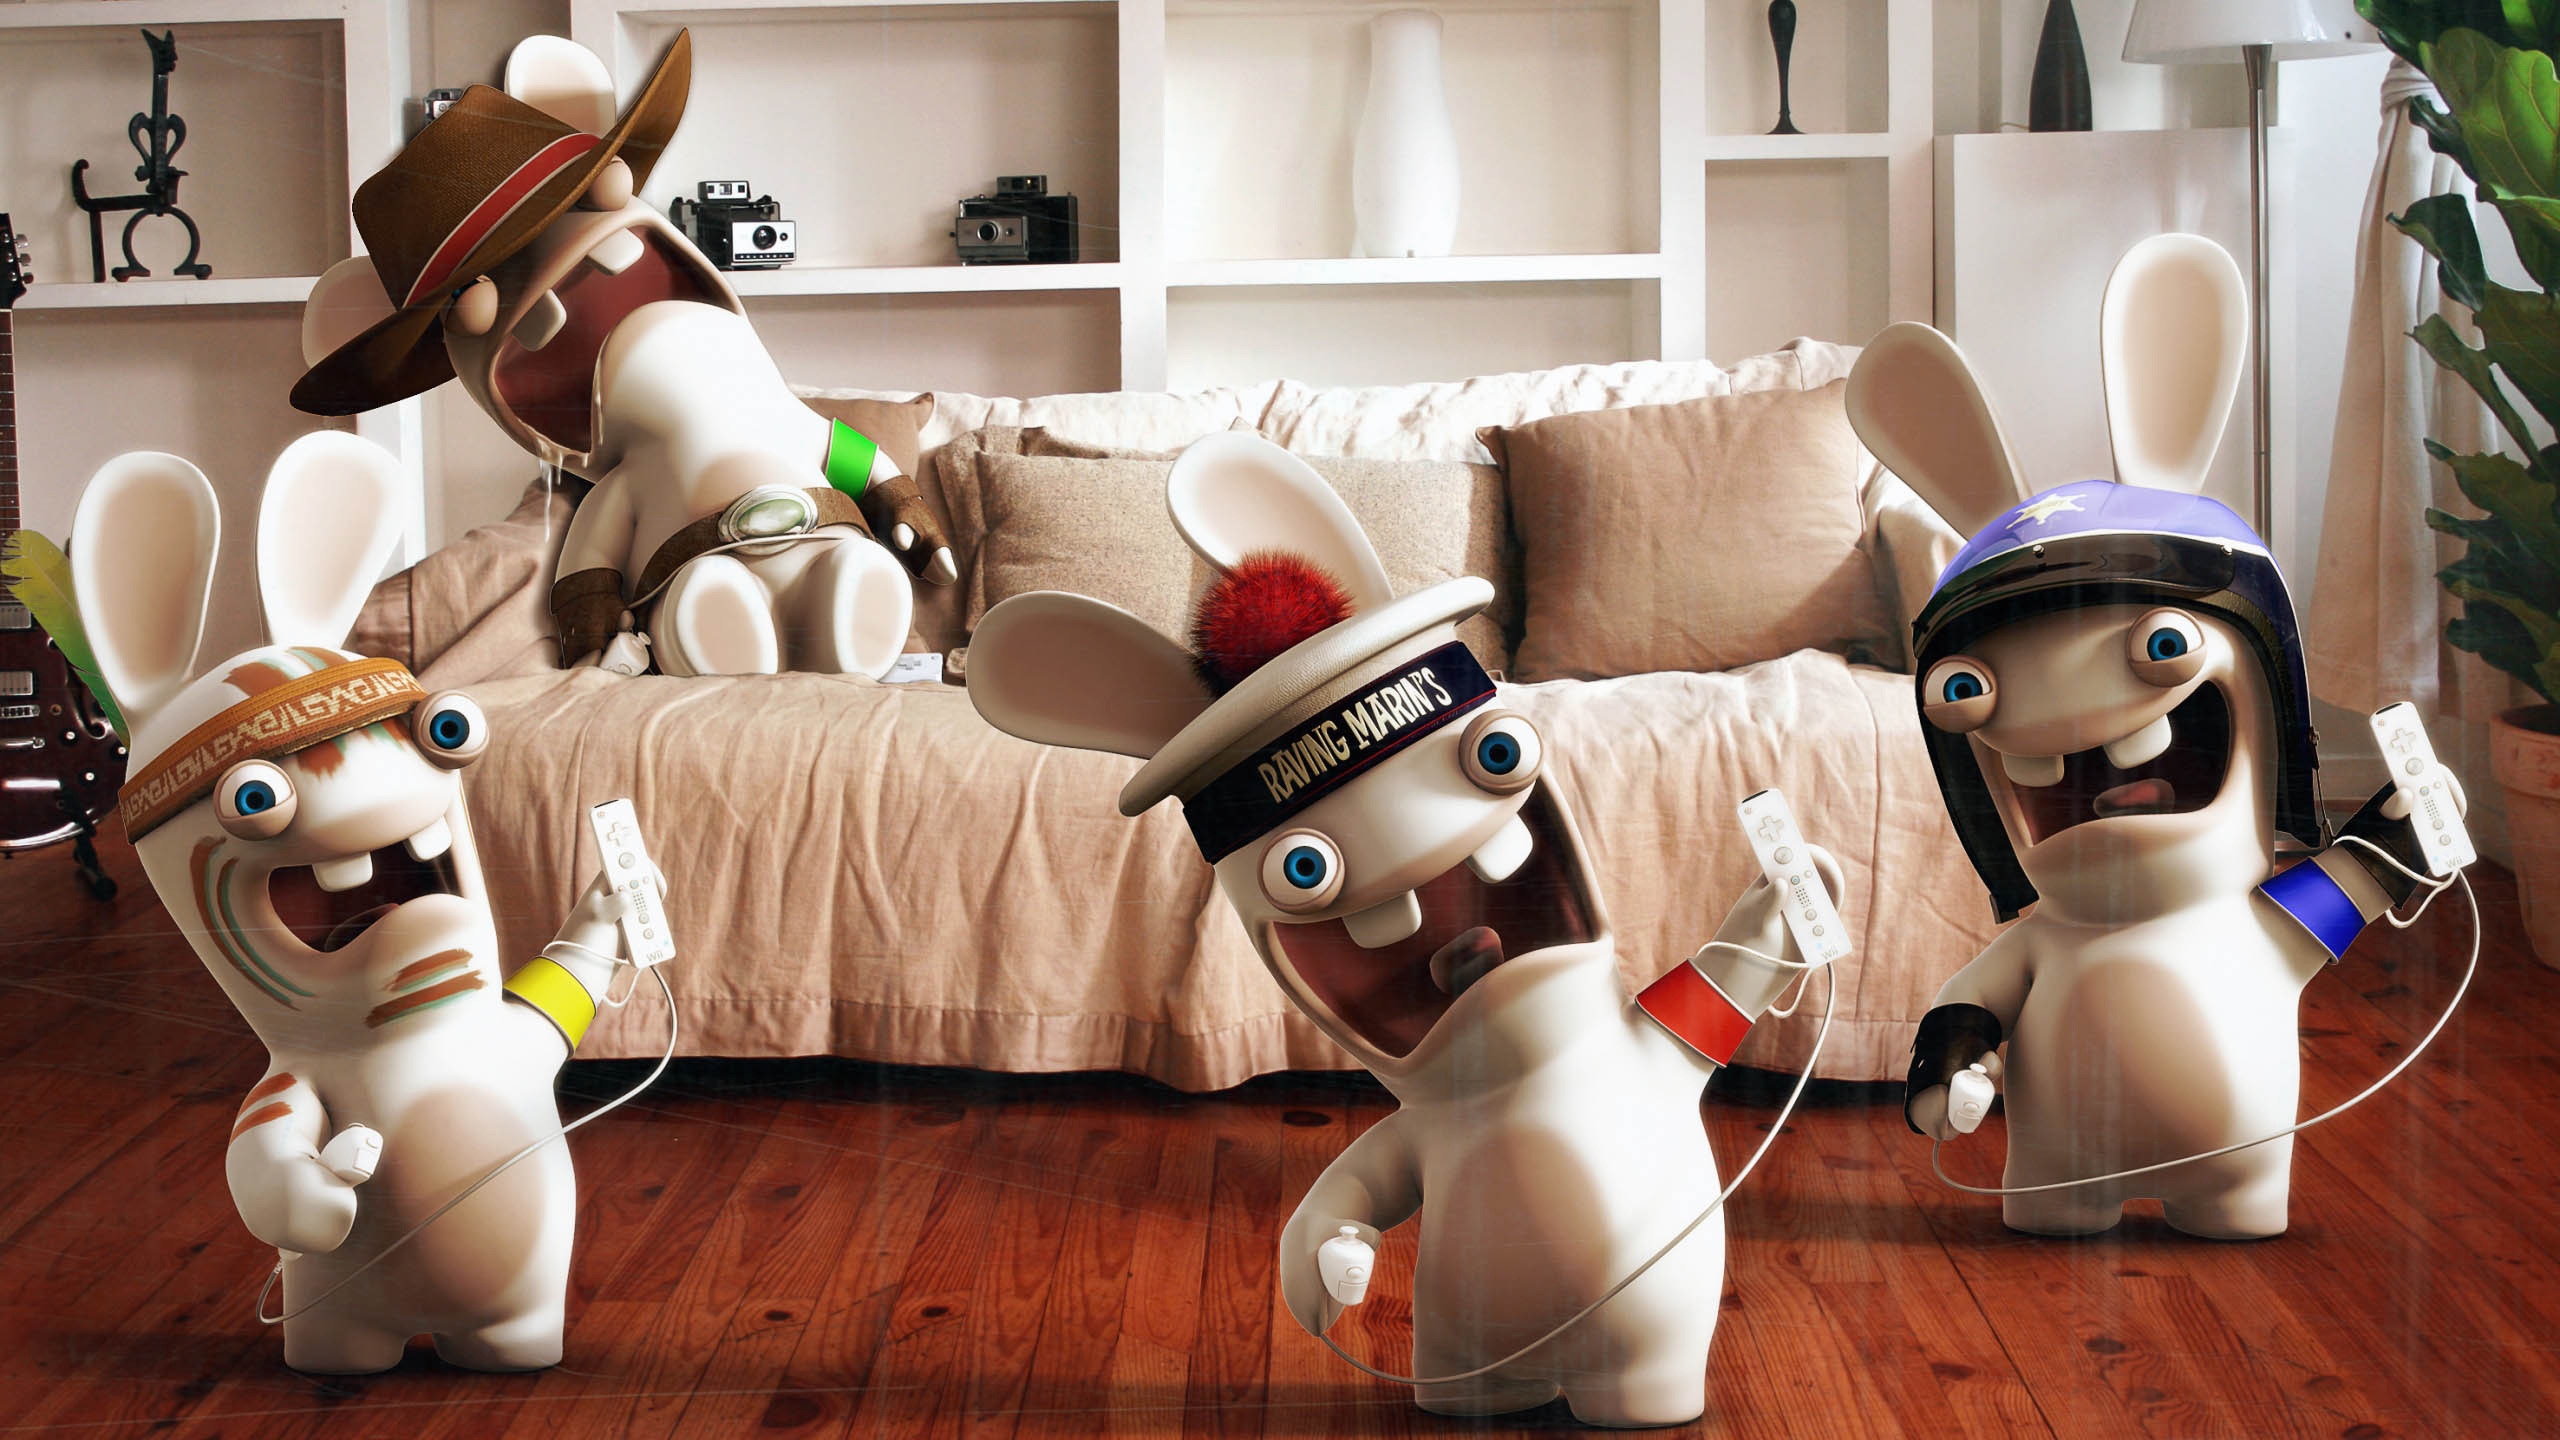 Rayman Raving Rabbids Playing Wii for 2560x1440 HDTV resolution